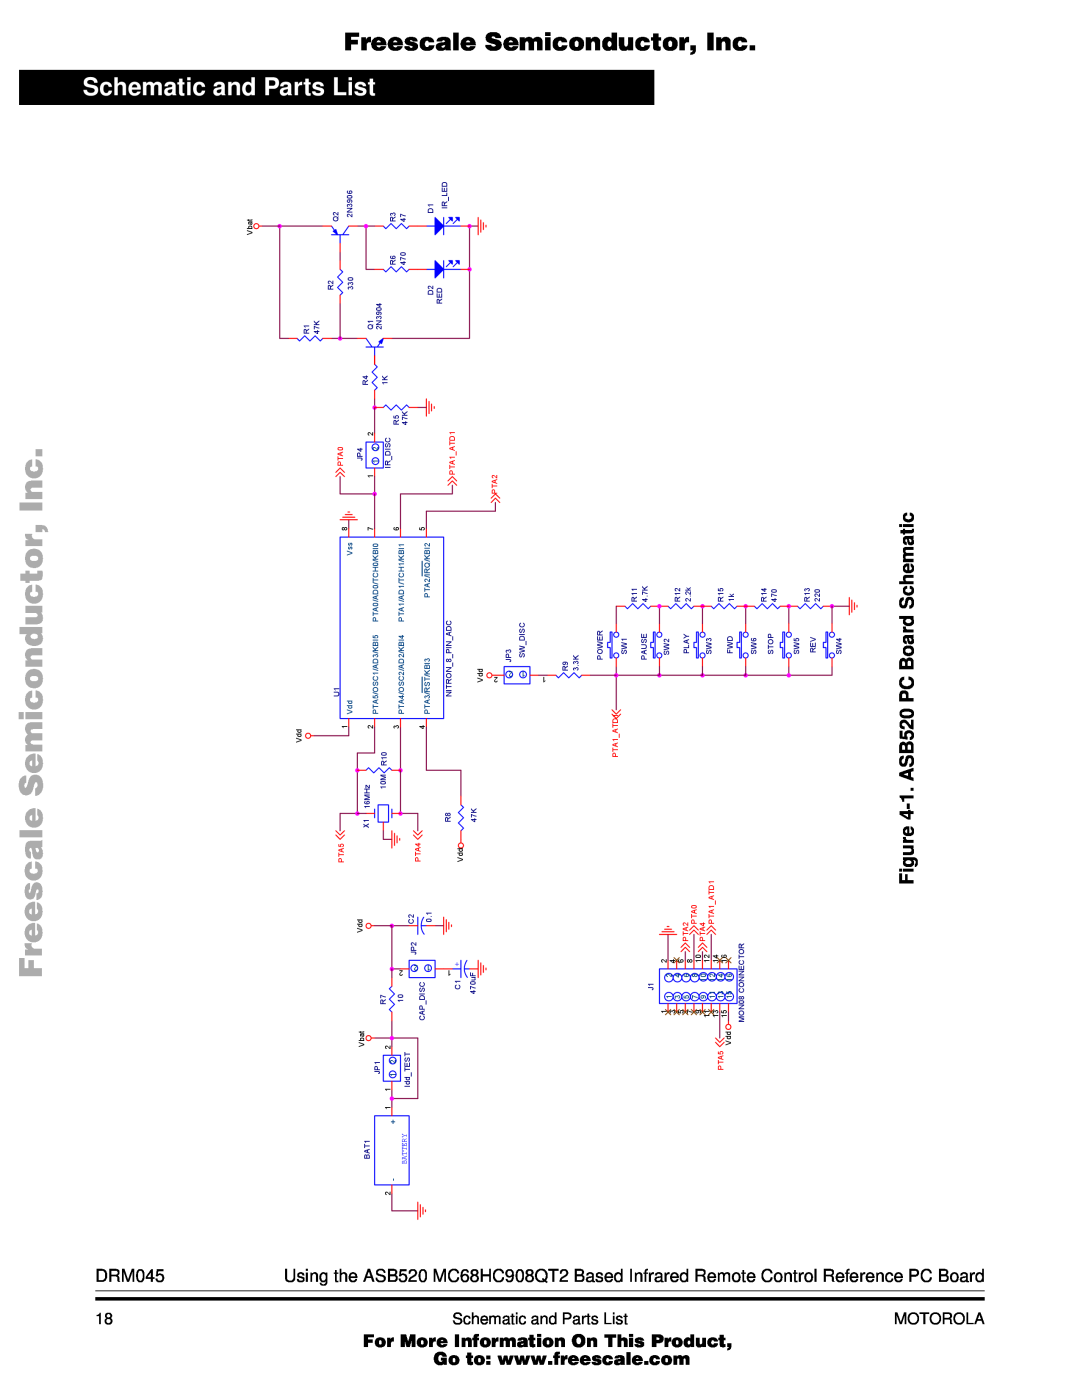 Freescale Semiconductor M68HC08 Semiconductor, Inc, Schematic and Parts List, Board Schematic, 1.ASB520 PC, Freescale 